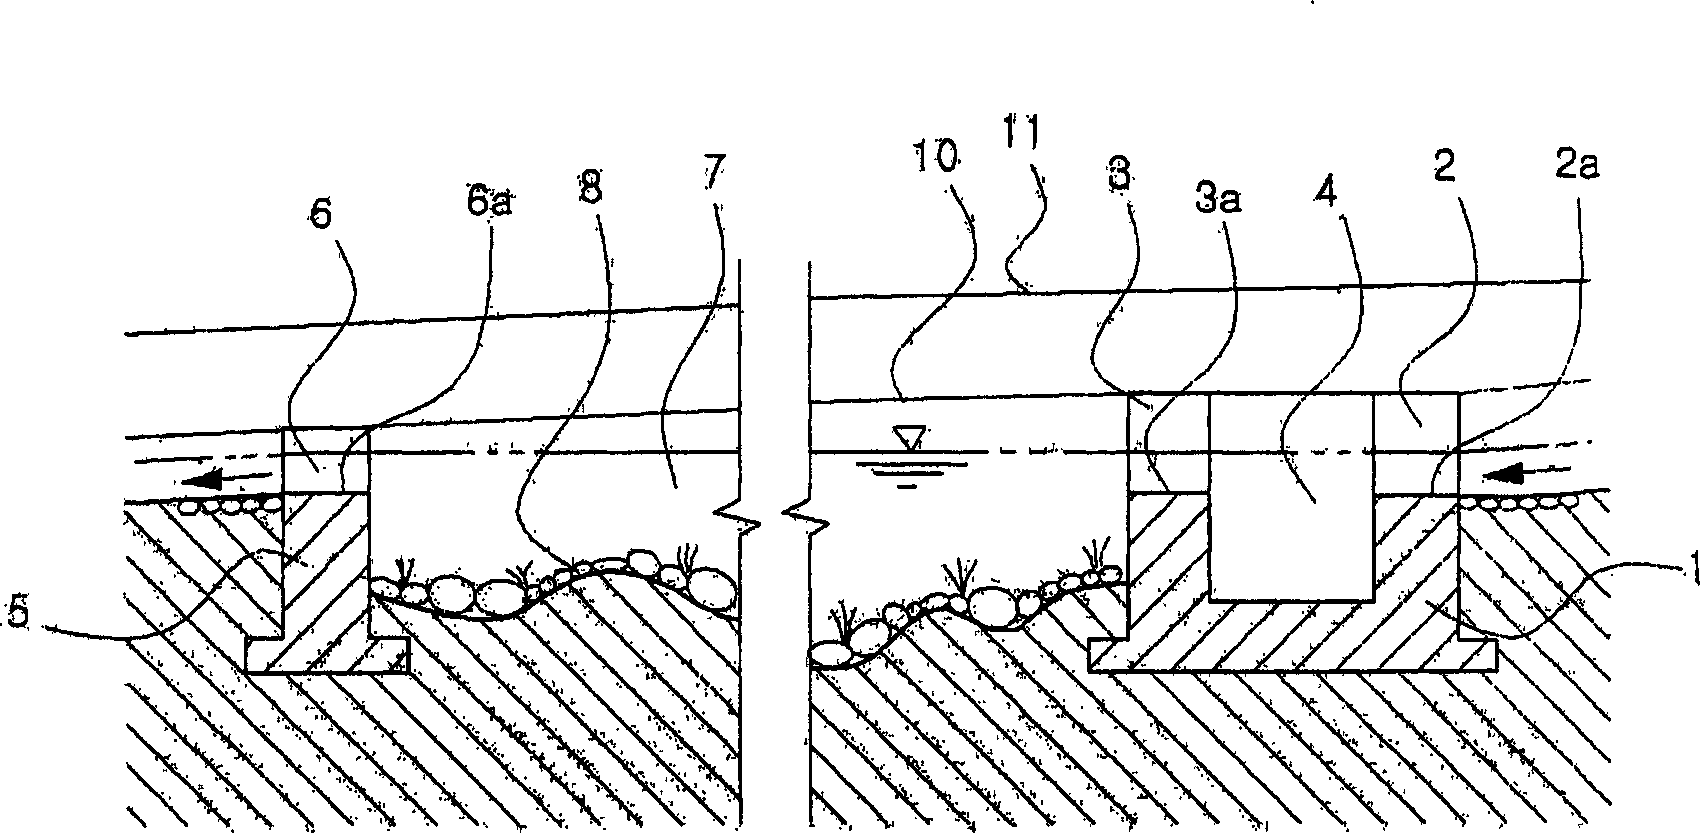 Method for recovering underwater ecosystem of a river